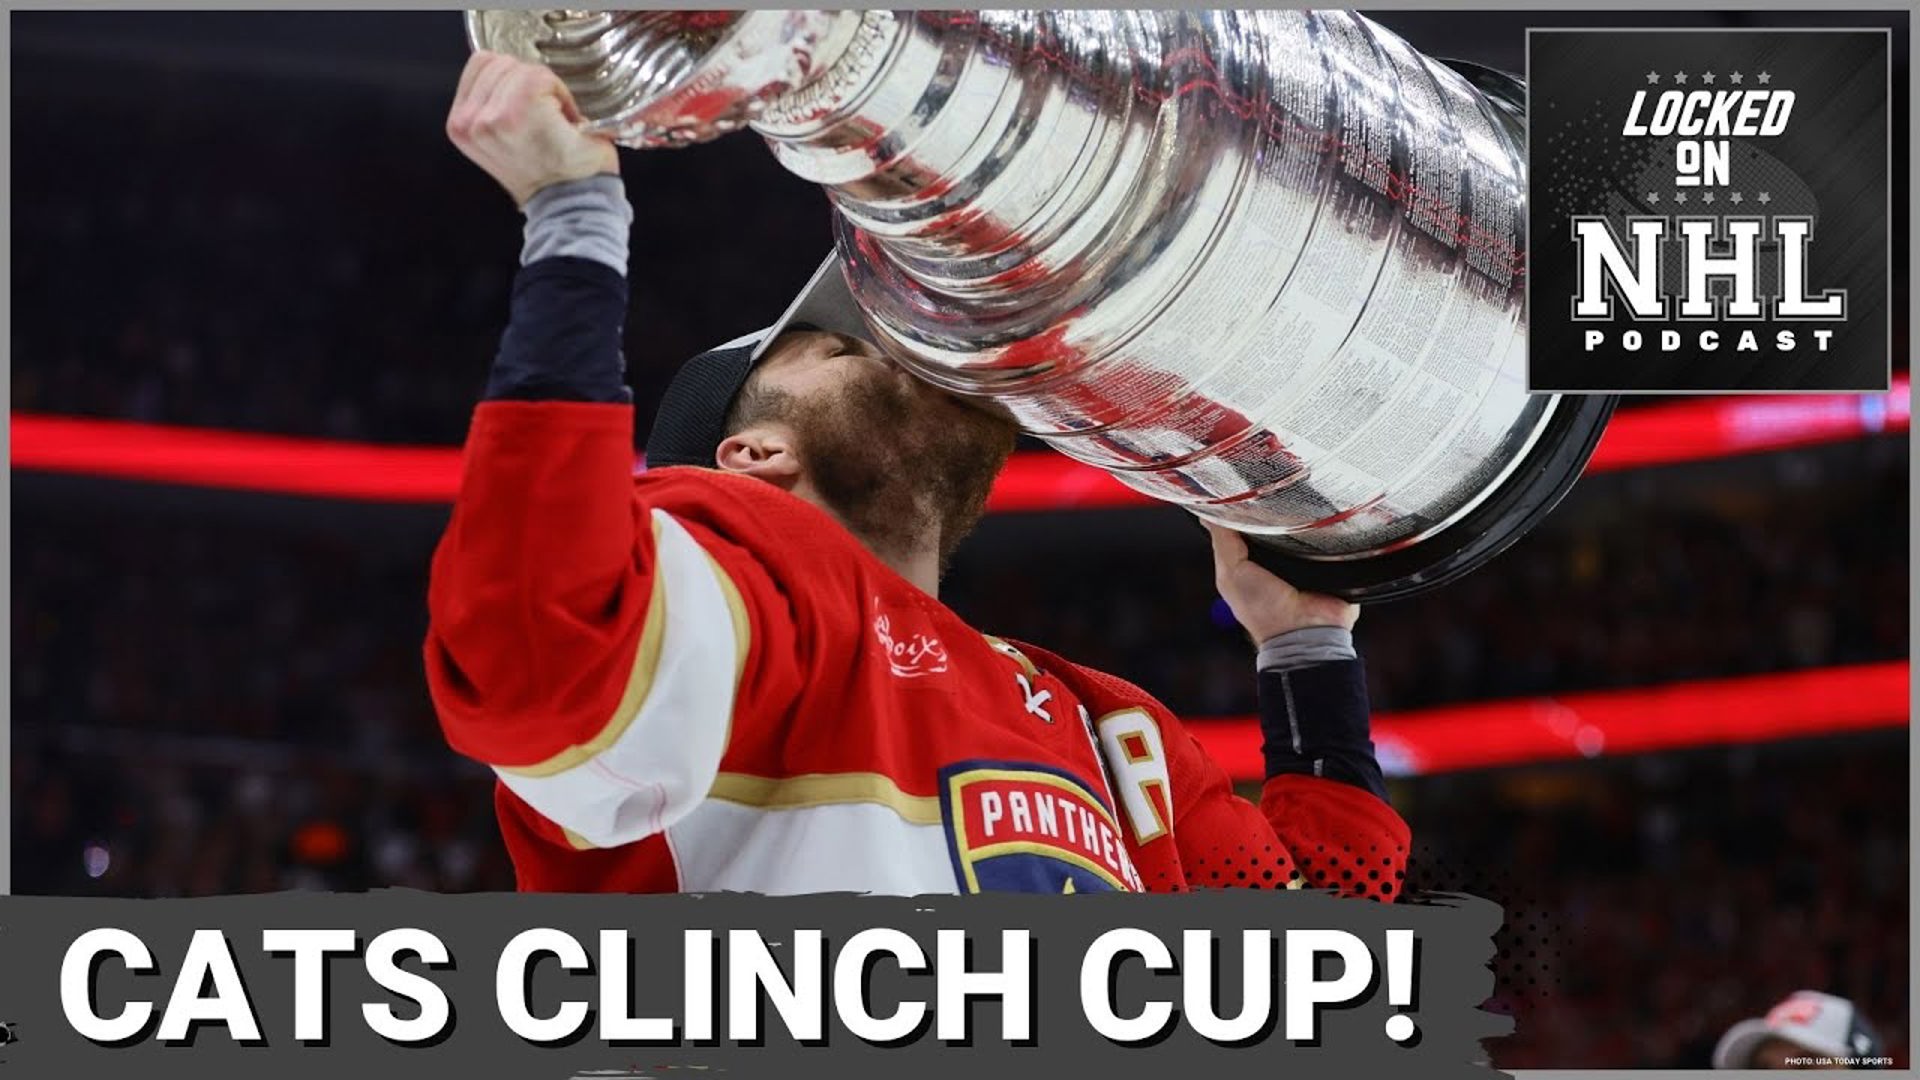 On today's Locked on NHL, Seth Toupal and JD Young react to the Florida Panthers clinching their first Stanley Cup in franchise history with a 2-1 win